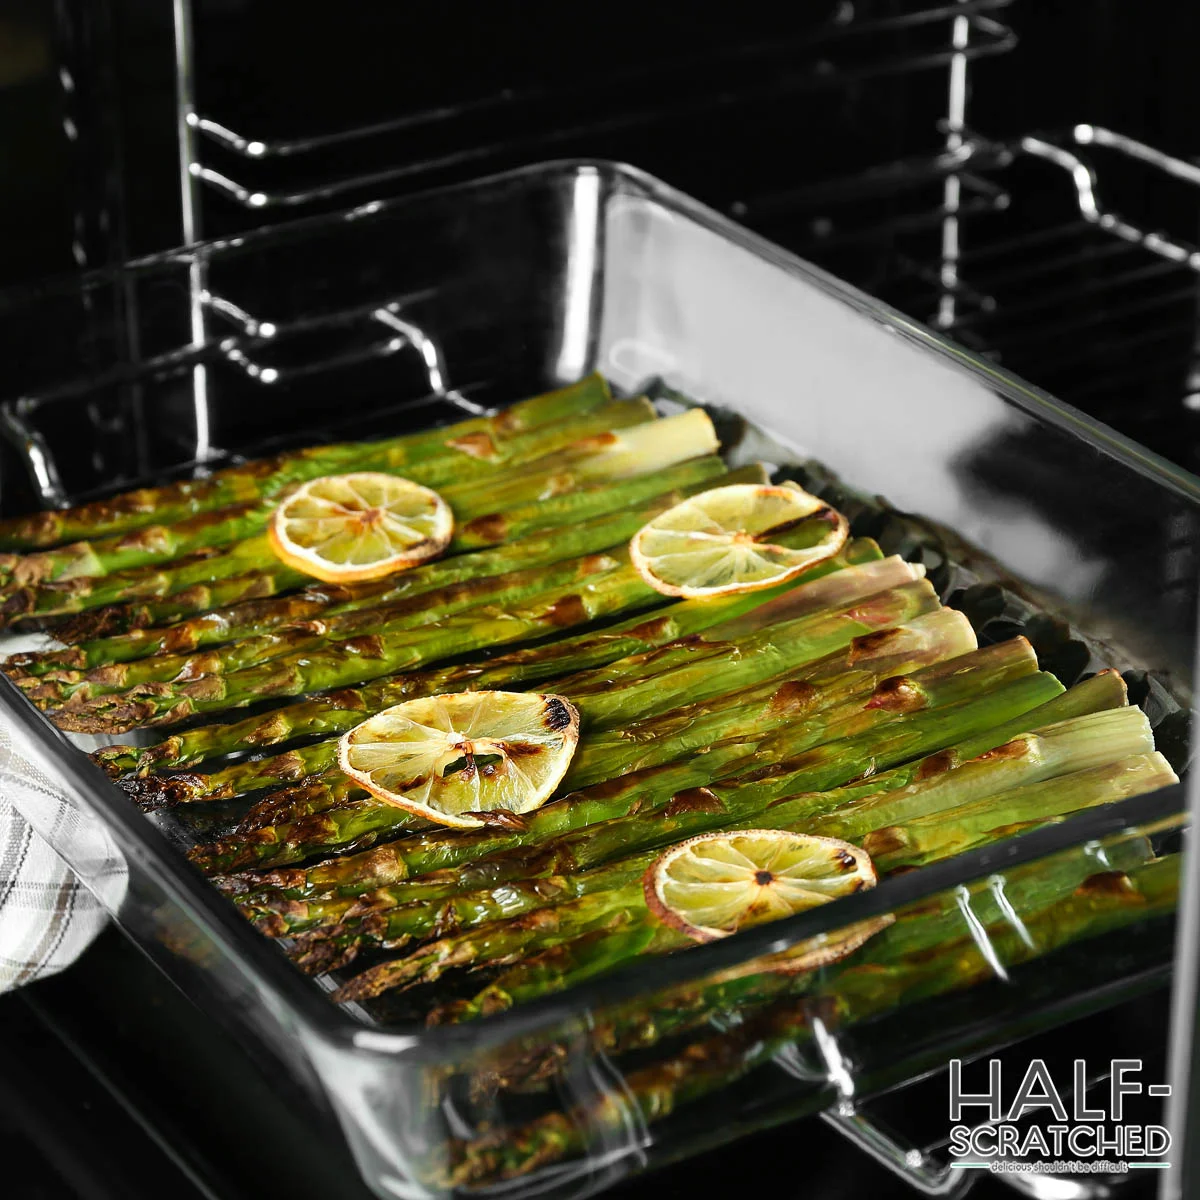 Taking asparagus out of oven